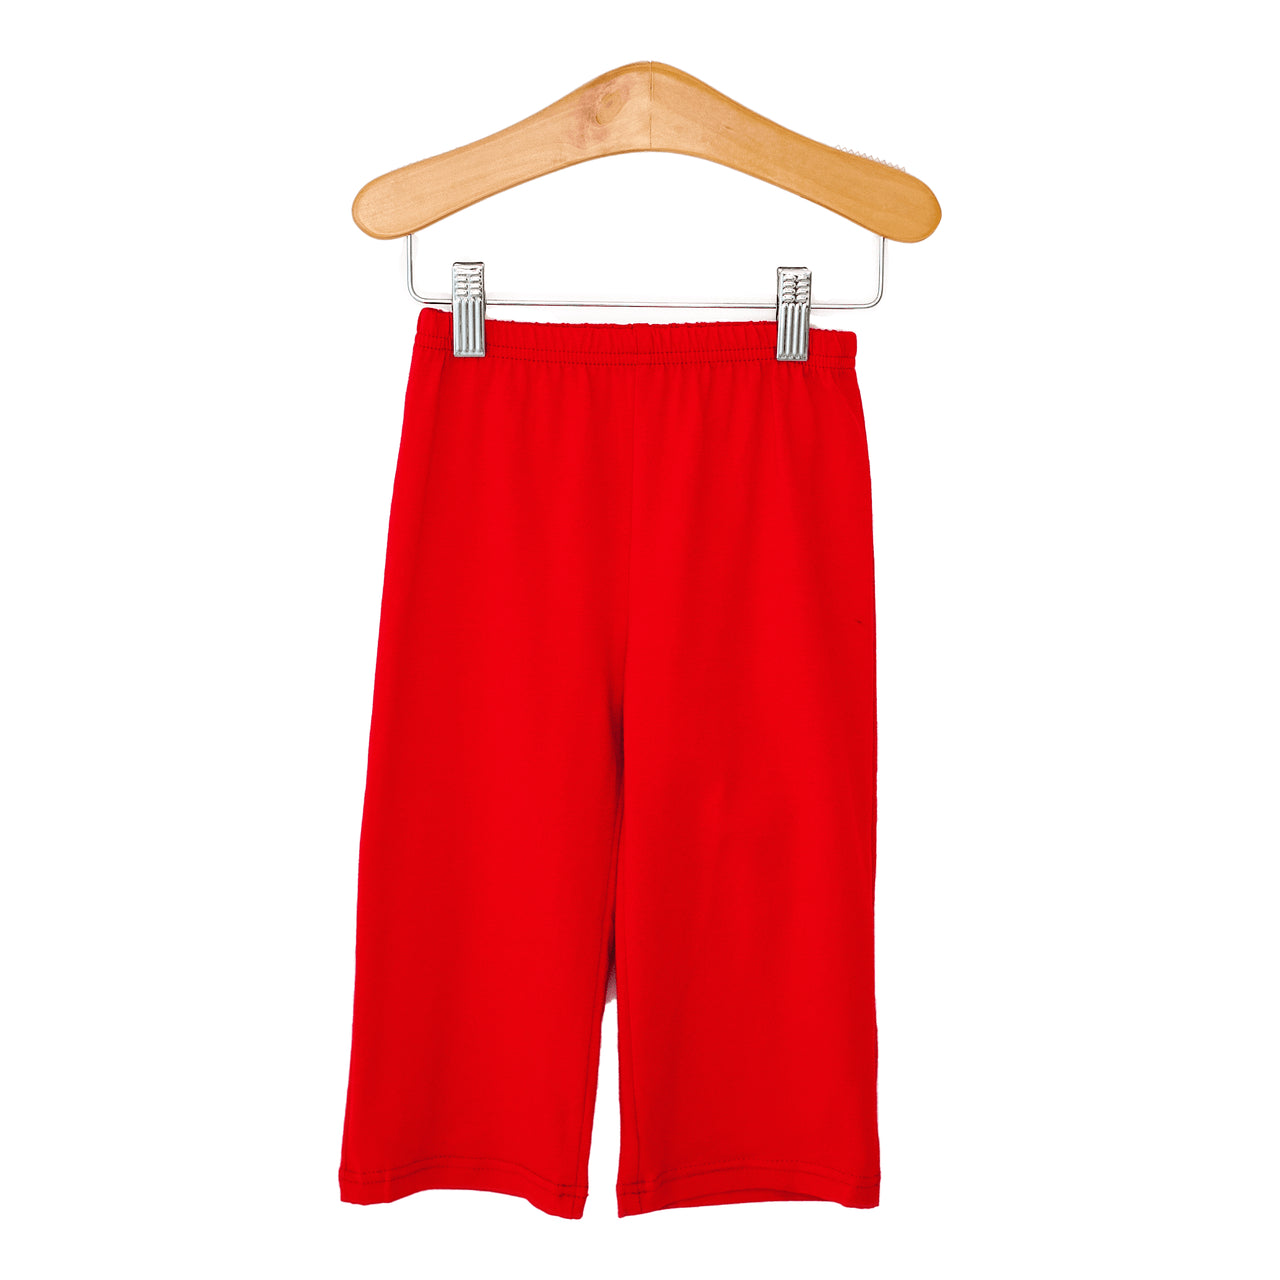 Trotter Street Red knit pants